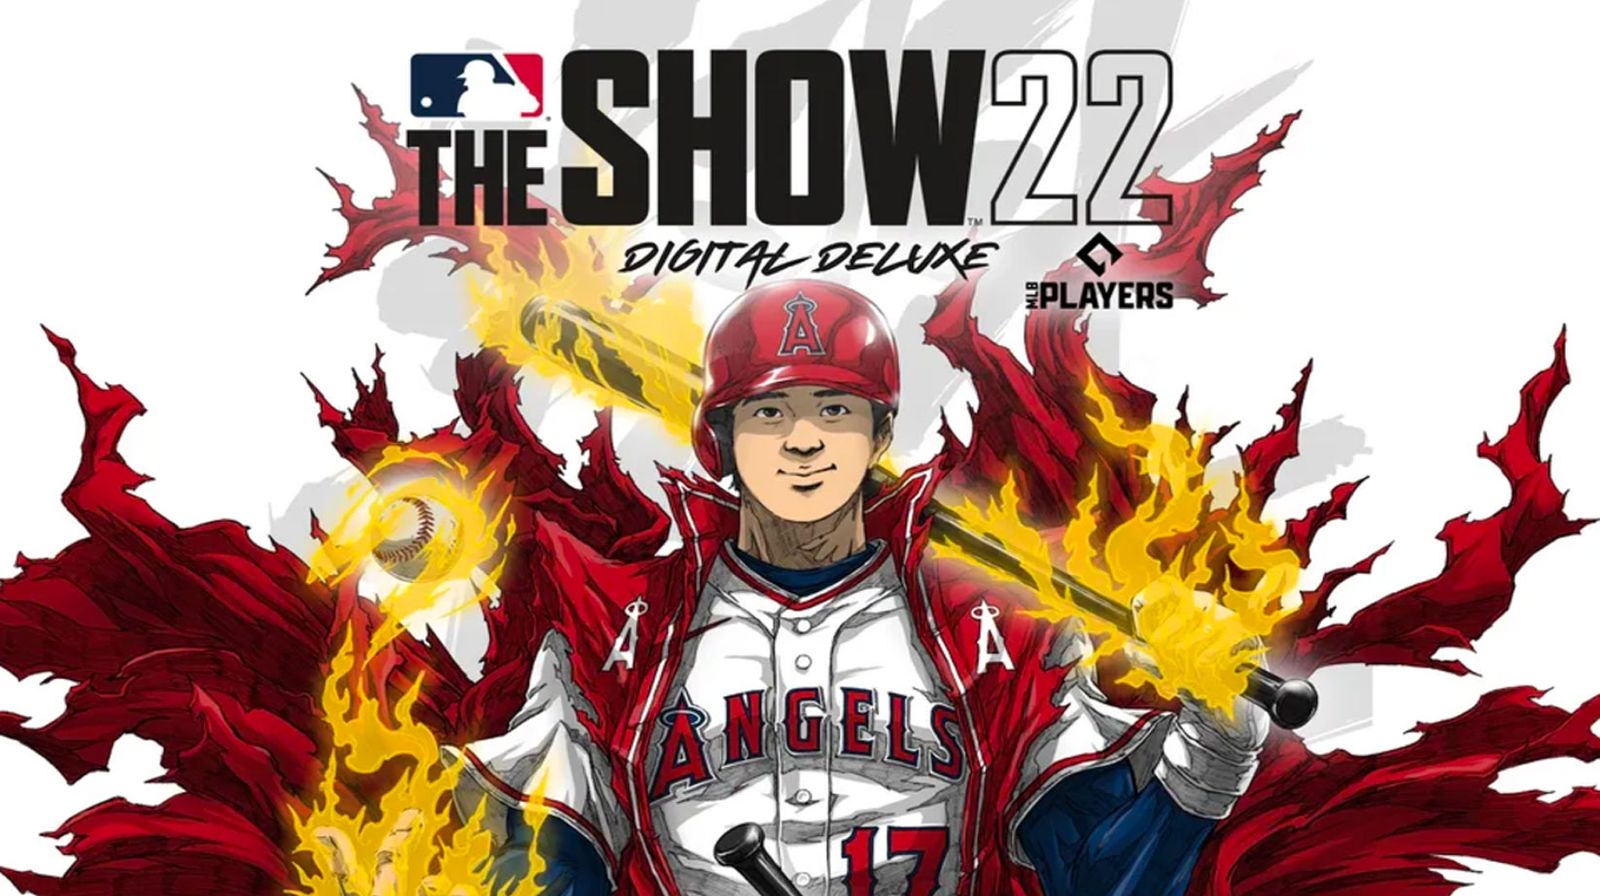 MLB The Show 22 